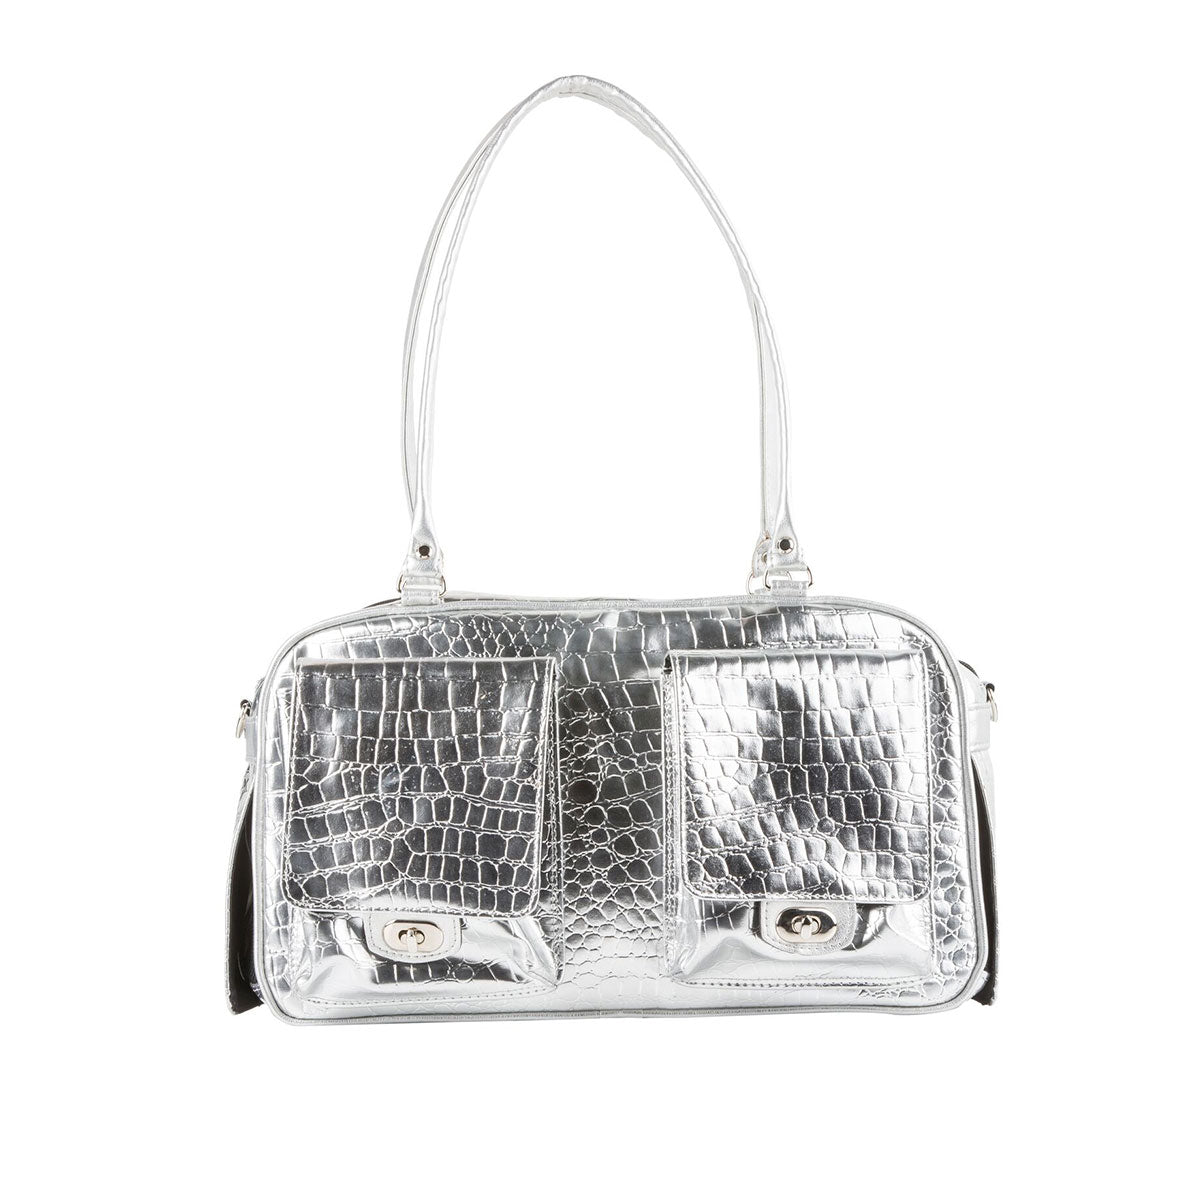 Marlee Pet Carrier - Silver Gator | Pawlicious & Company